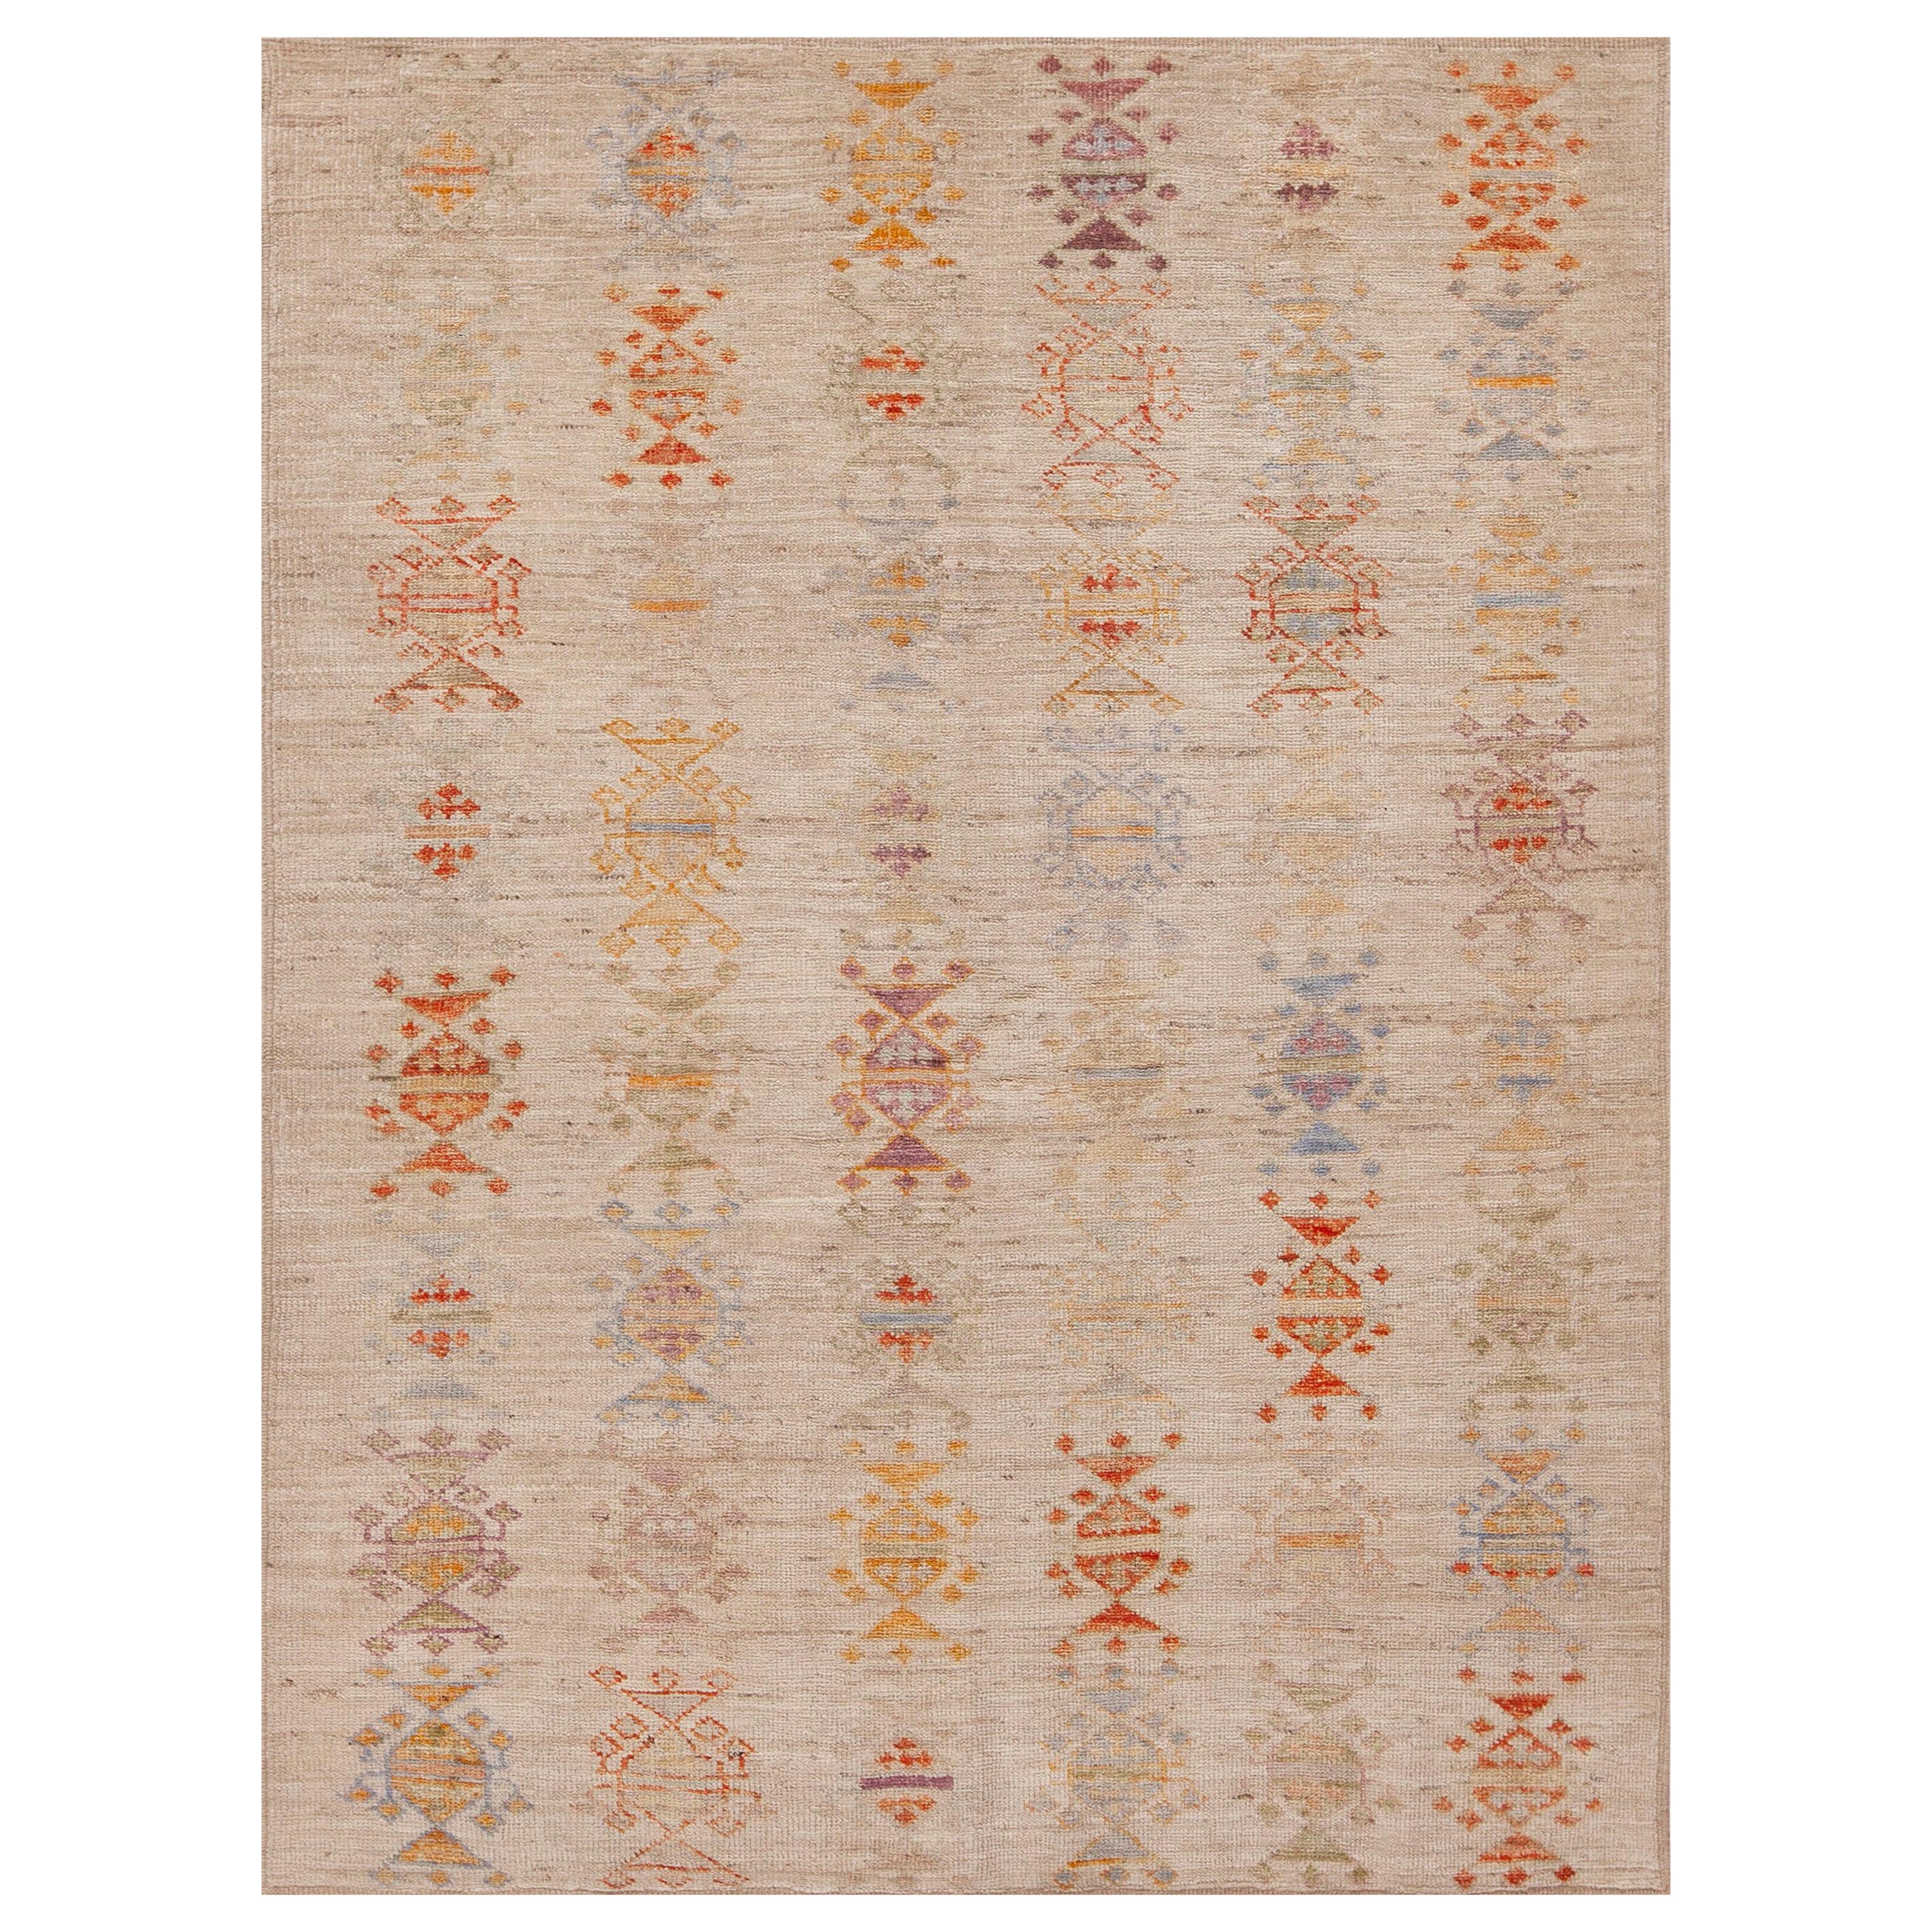 Nazmiyal Collection Small Tribal Modern Contemporary Rustic Rug 4'5" x 5'11" For Sale